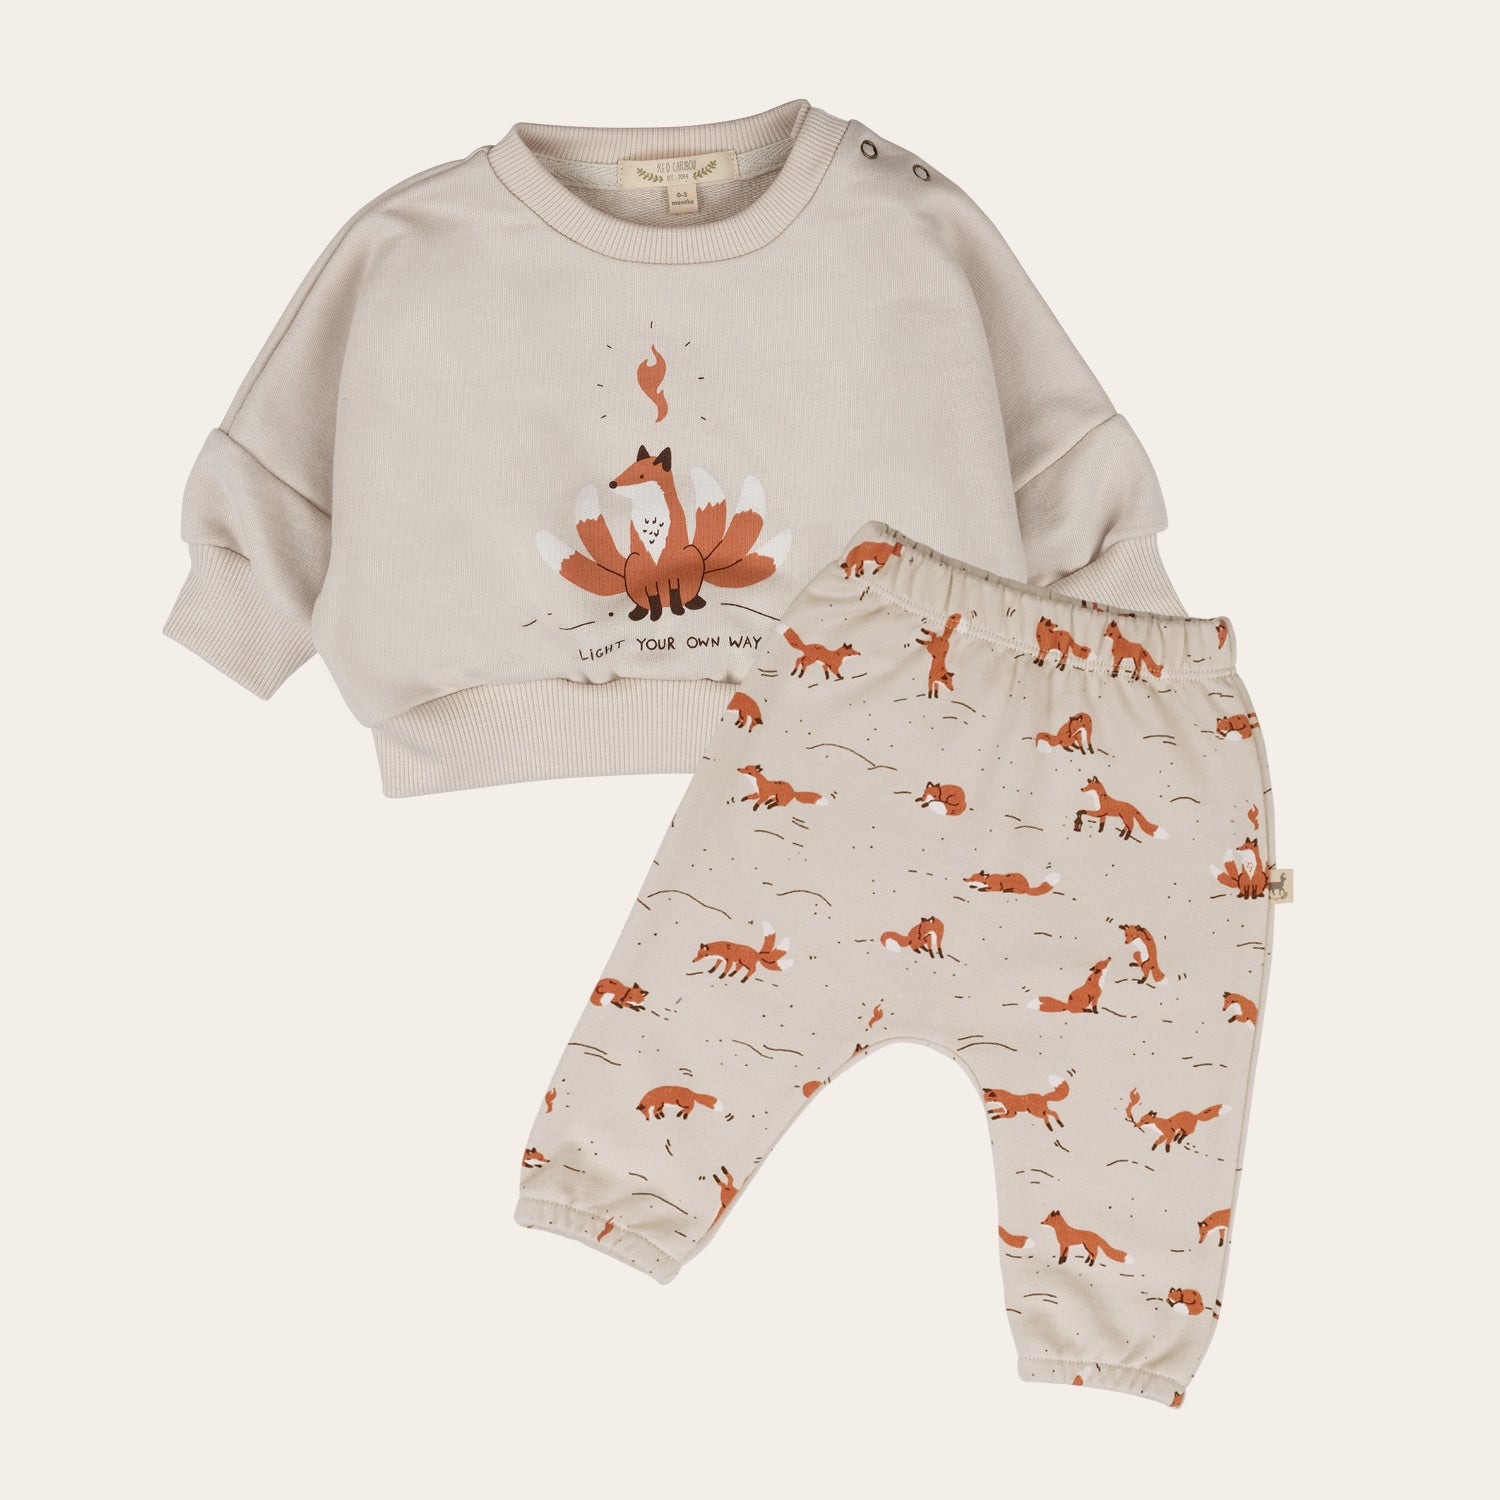 'light your own way' white sand sweatshirt + jogger baby outfit